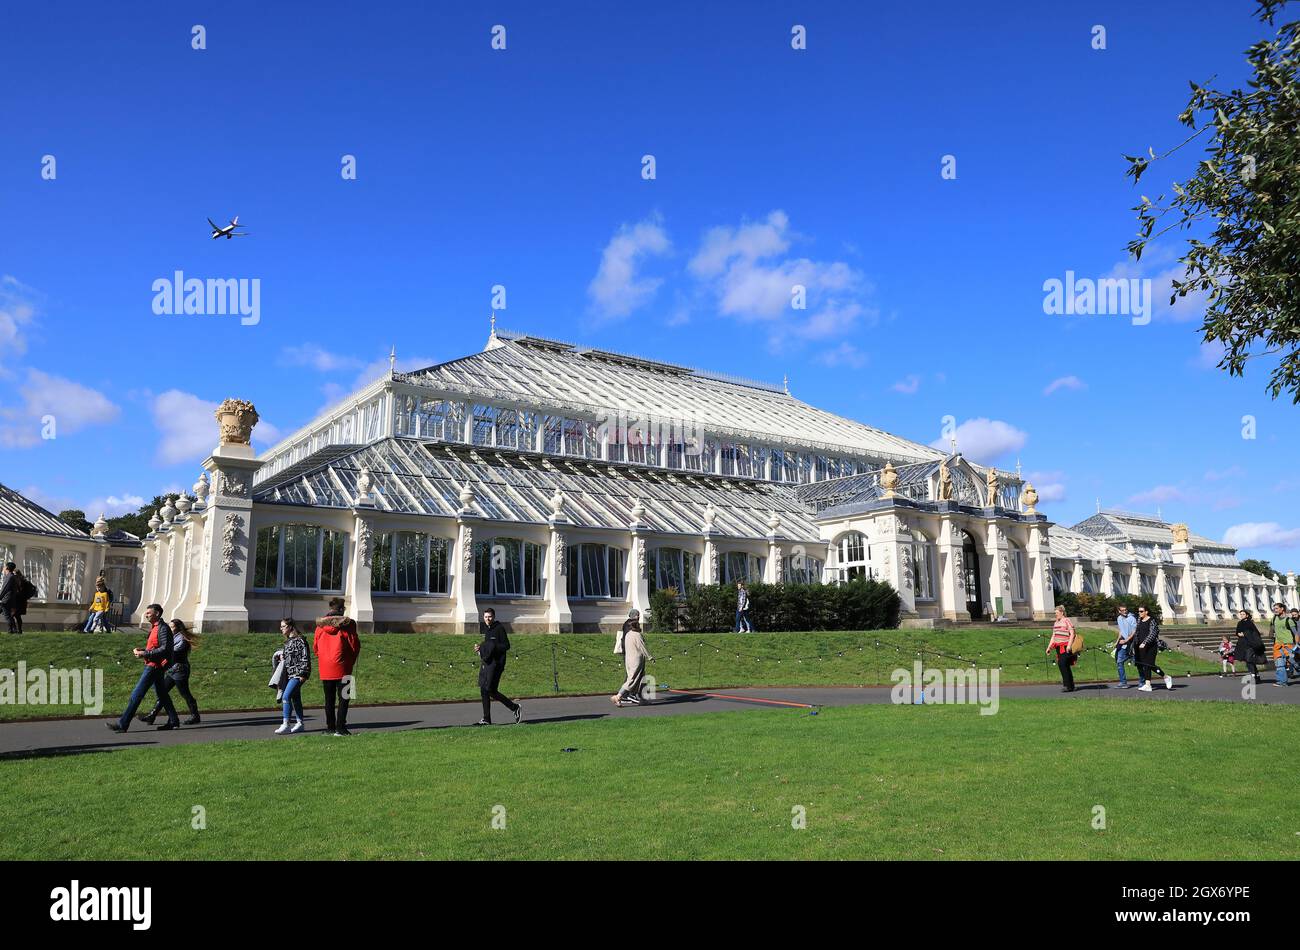 The stunning Temperate House, in autumn sunshine, at Kew Gardens, SW London, UK Stock Photo